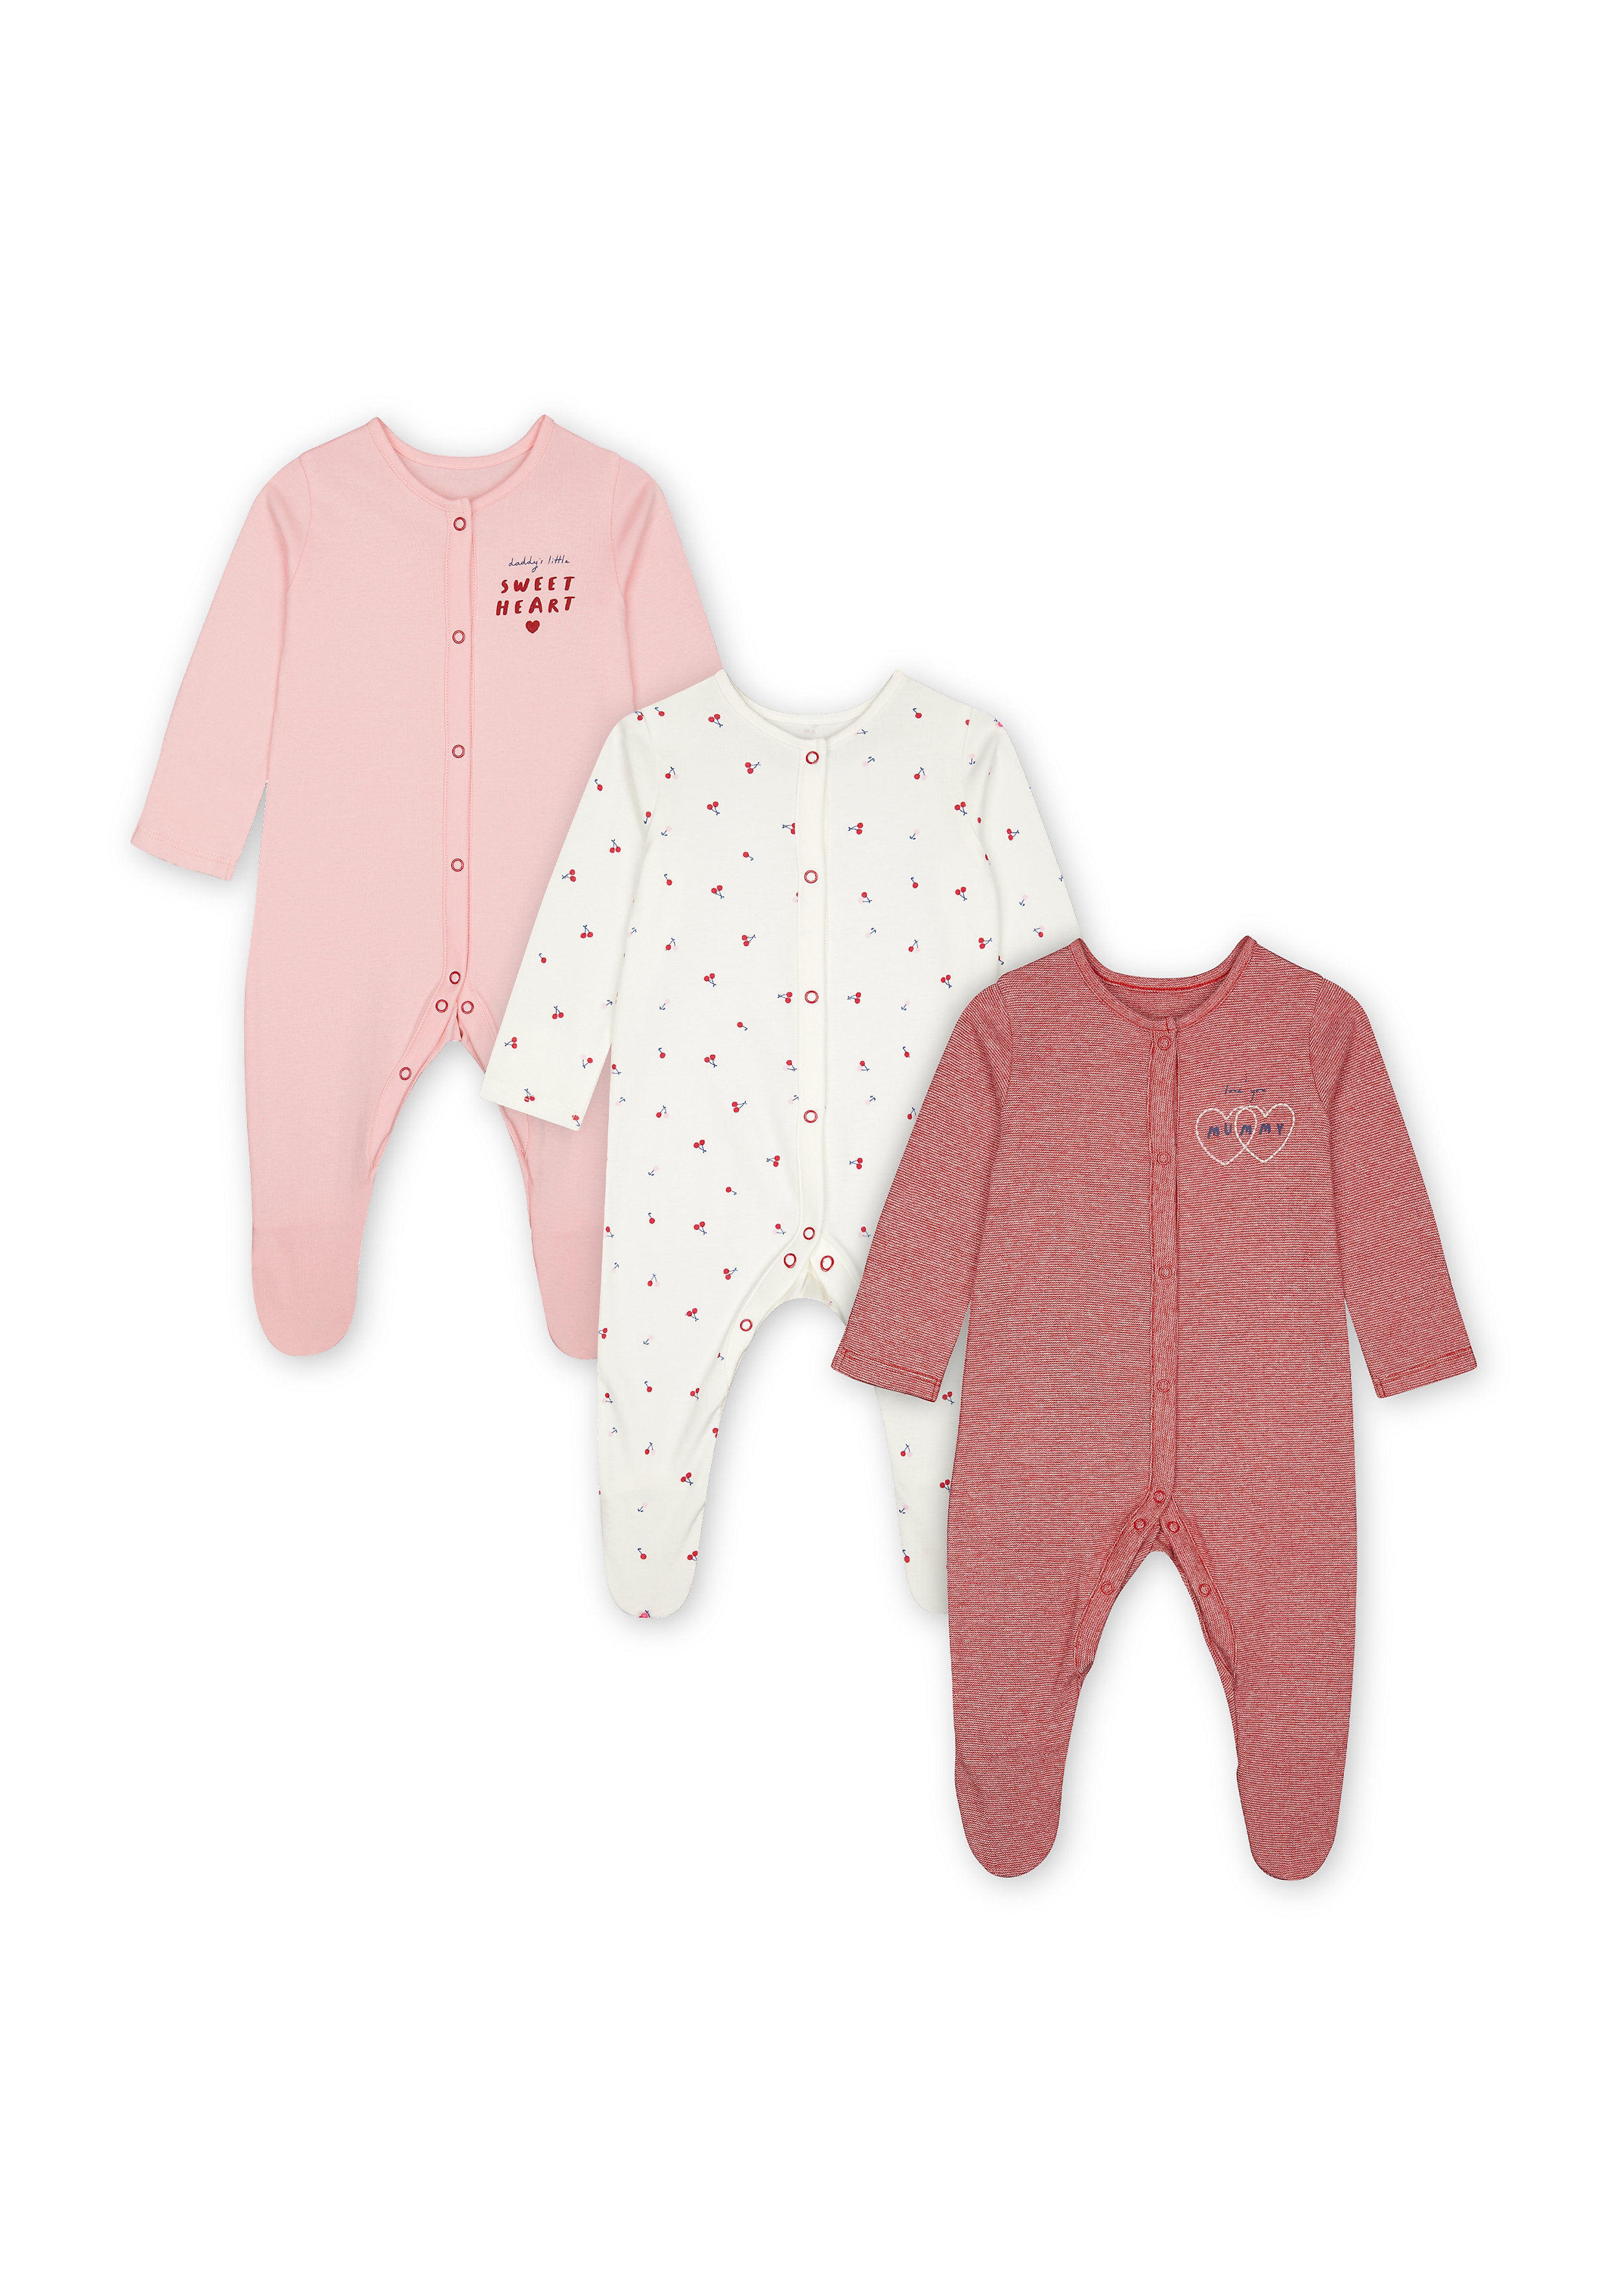 Mothercare | Girls Full Sleeves Sleepsuits  - Pack Of 3 - Pink